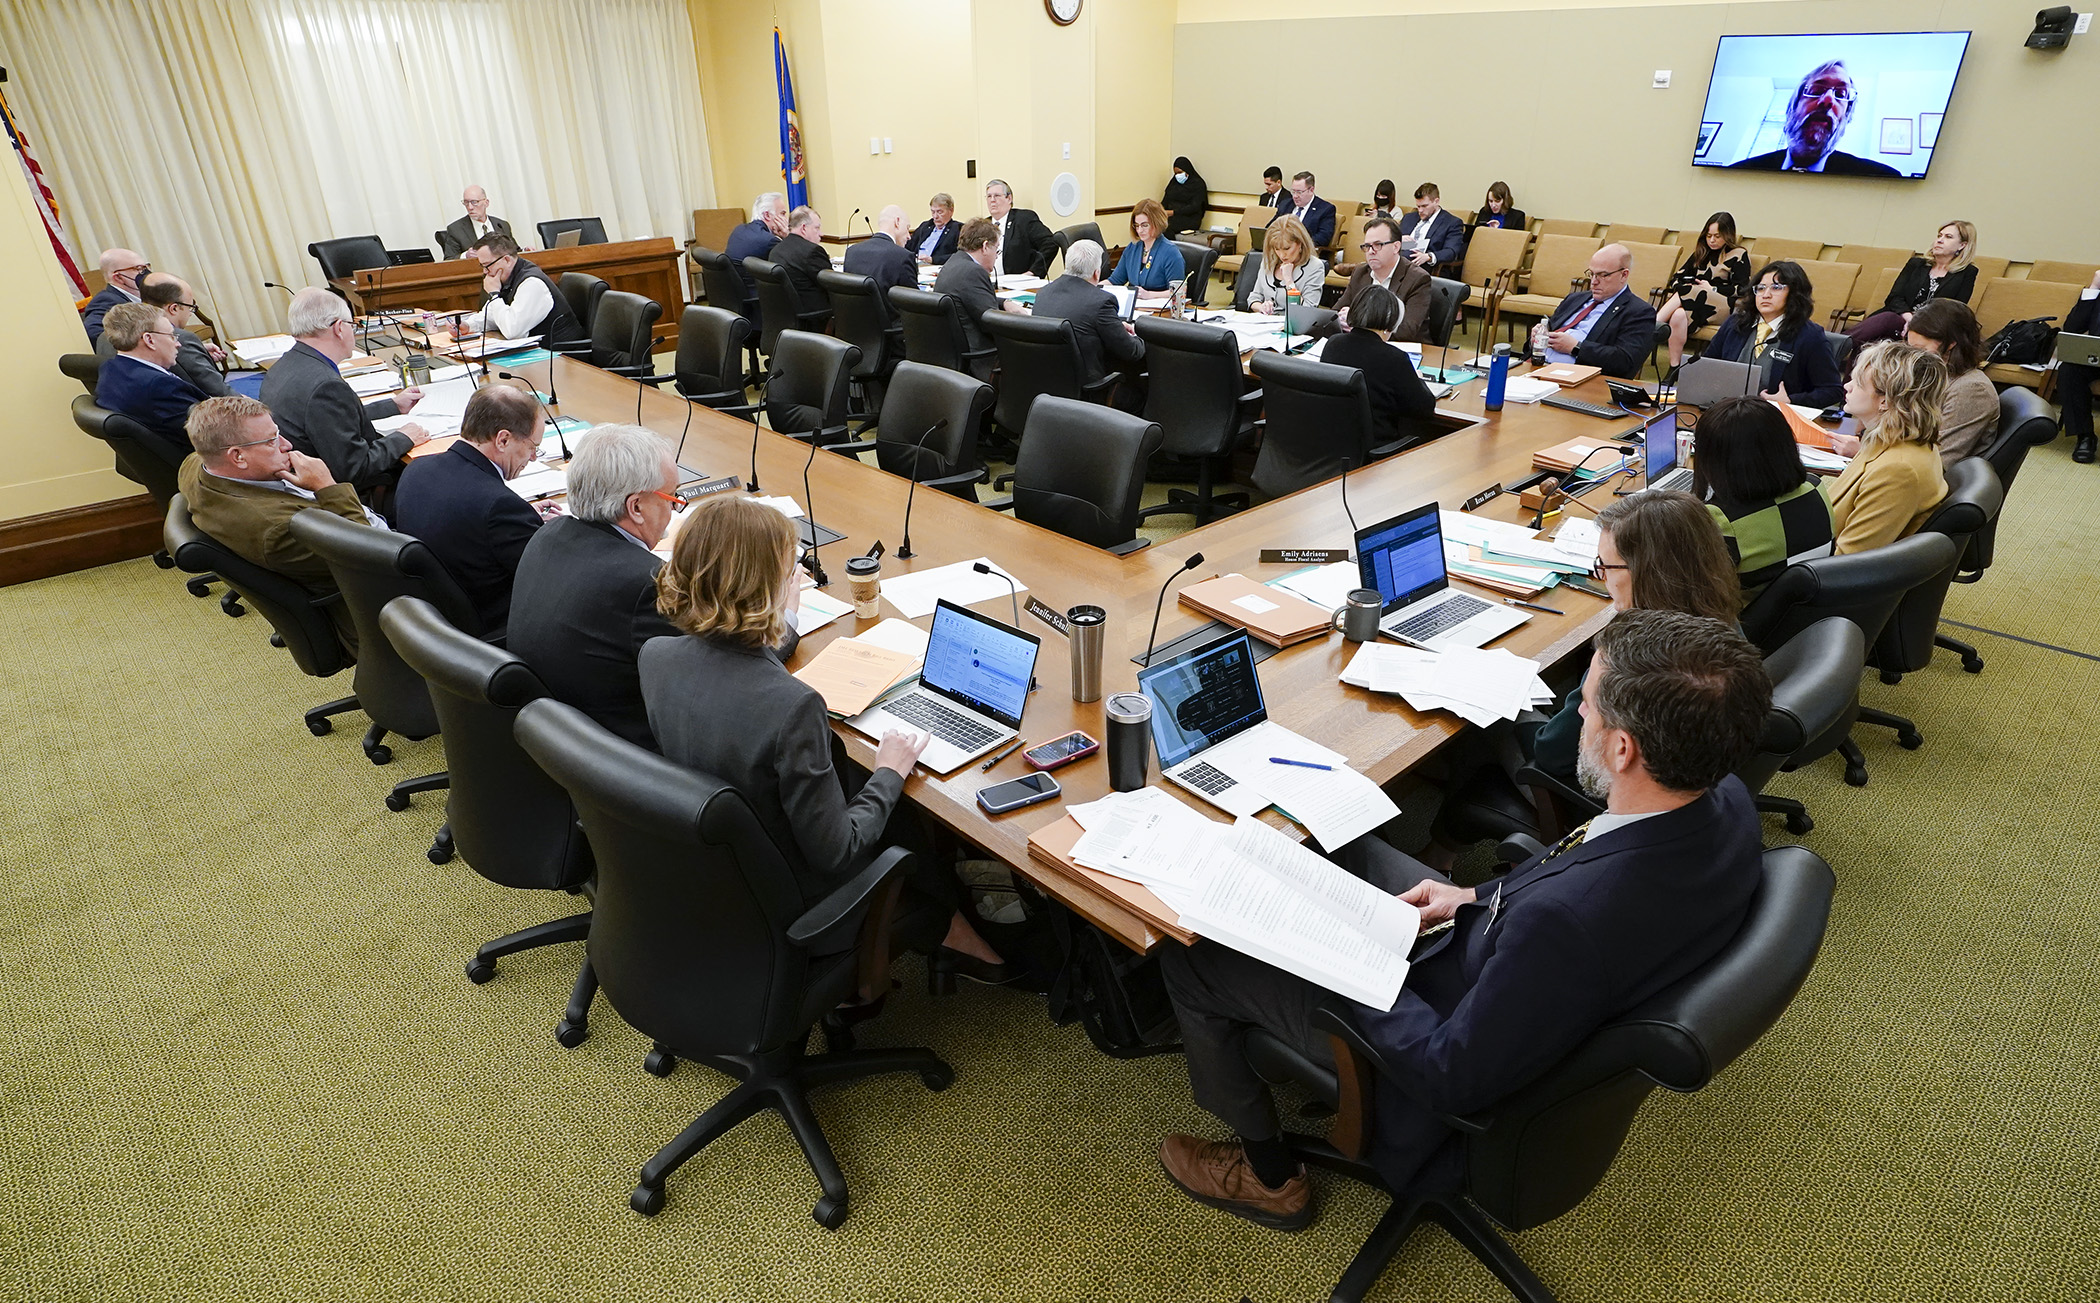 Members of the House Ways and Means Committee discuss provisions of the omnibus early childhood and education finance and policy bills April 21. (Photo by Paul Battaglia)